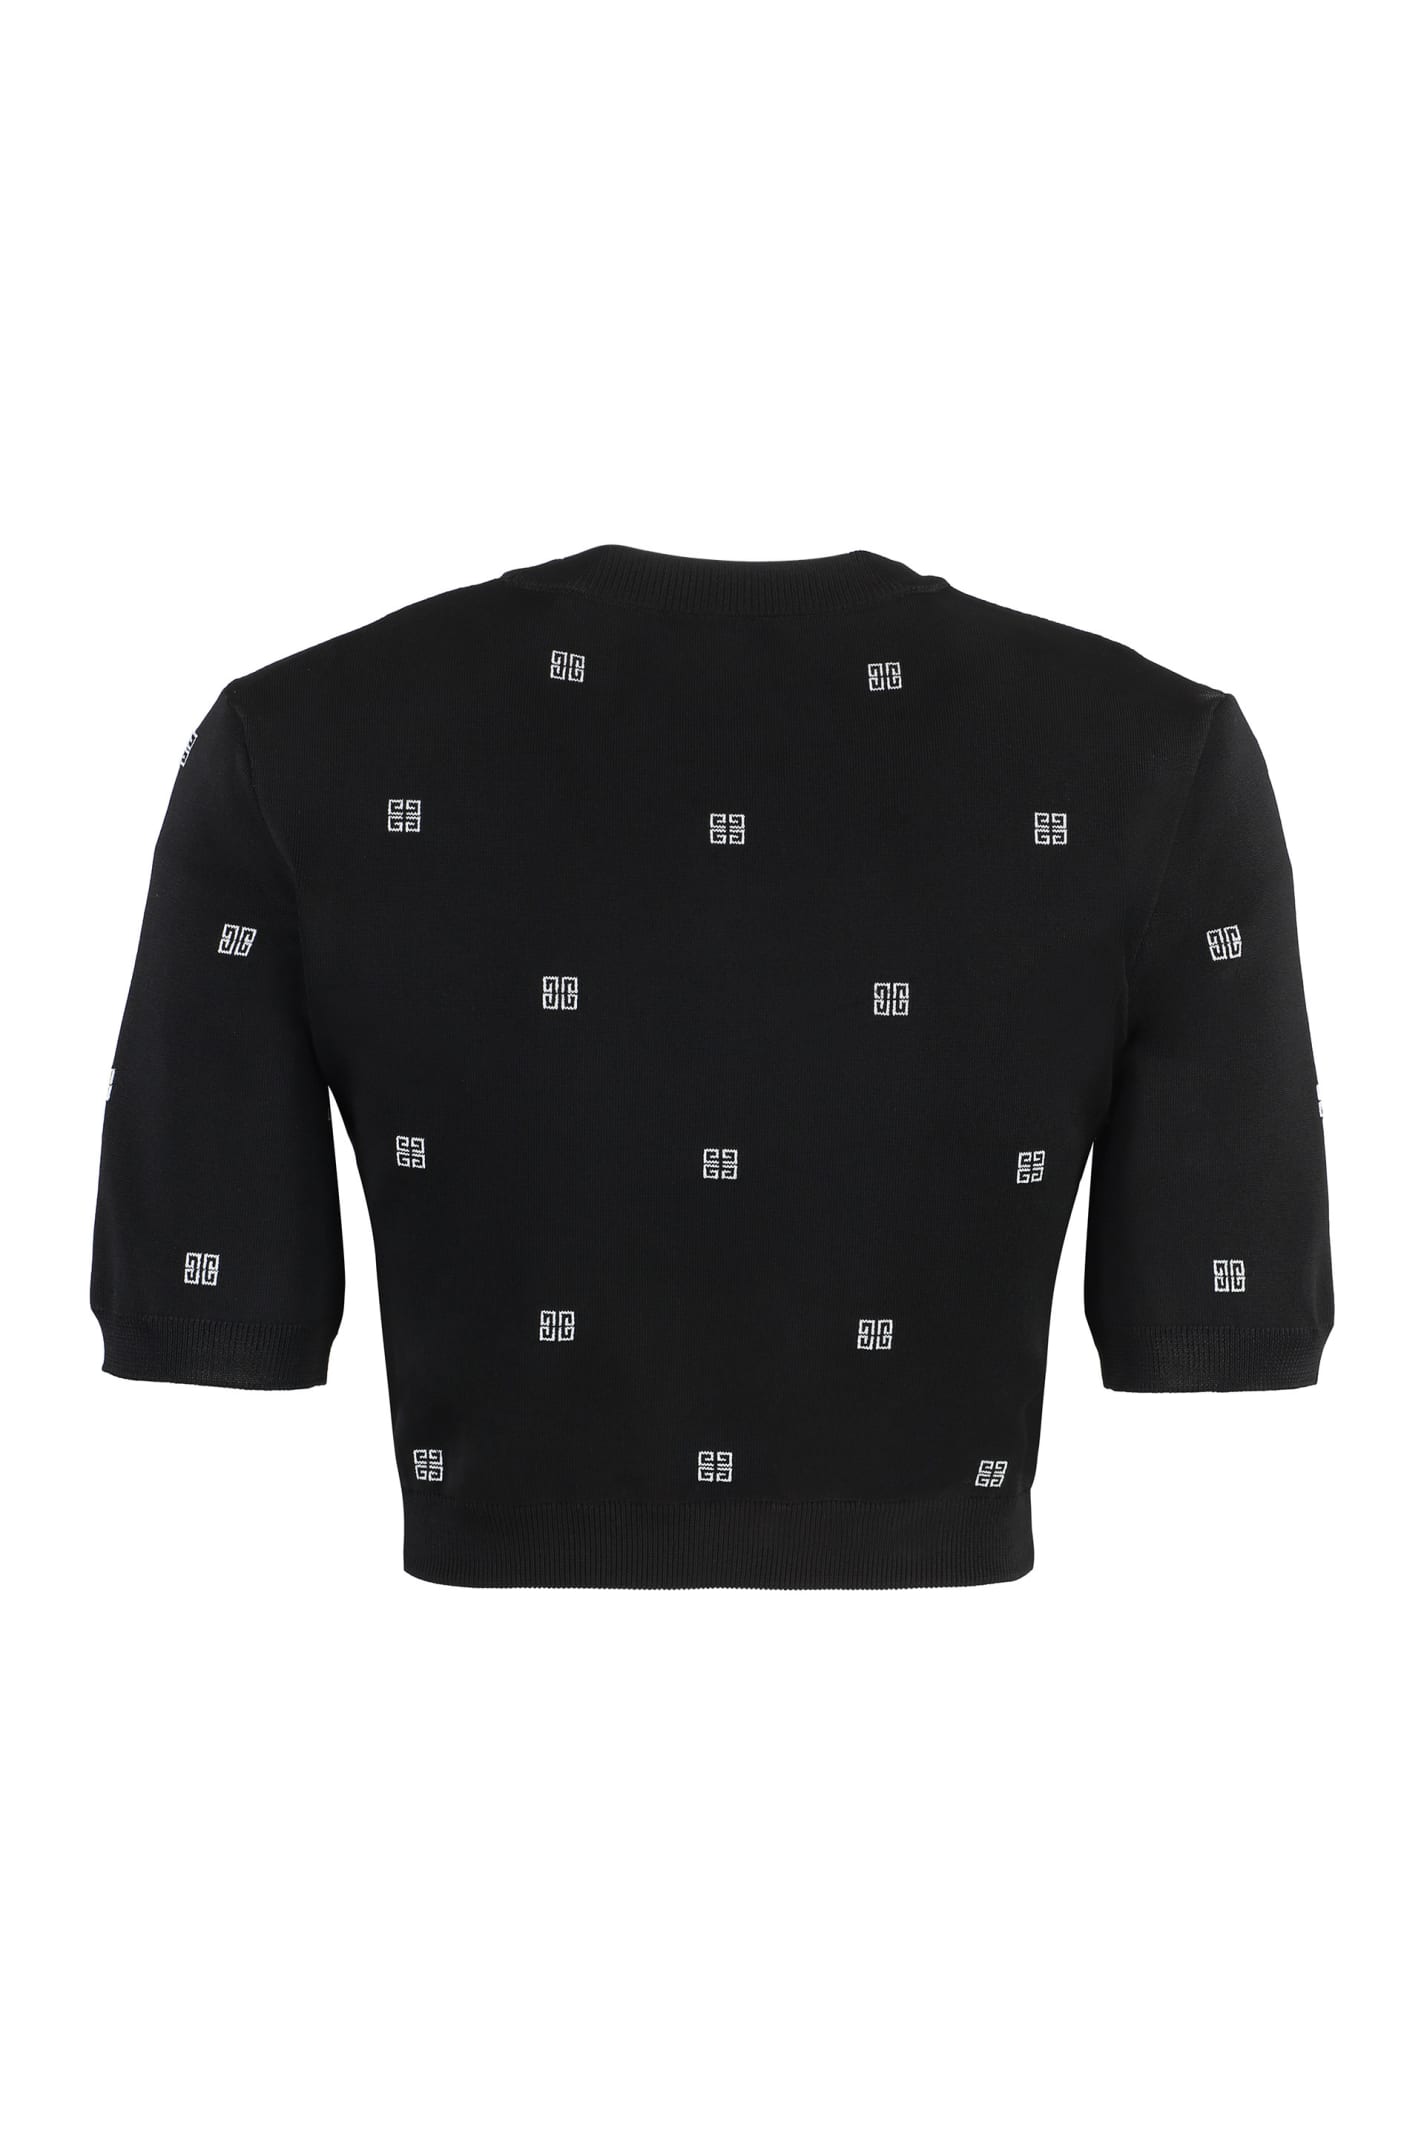 Shop Givenchy Jacquard Knit Top In Black